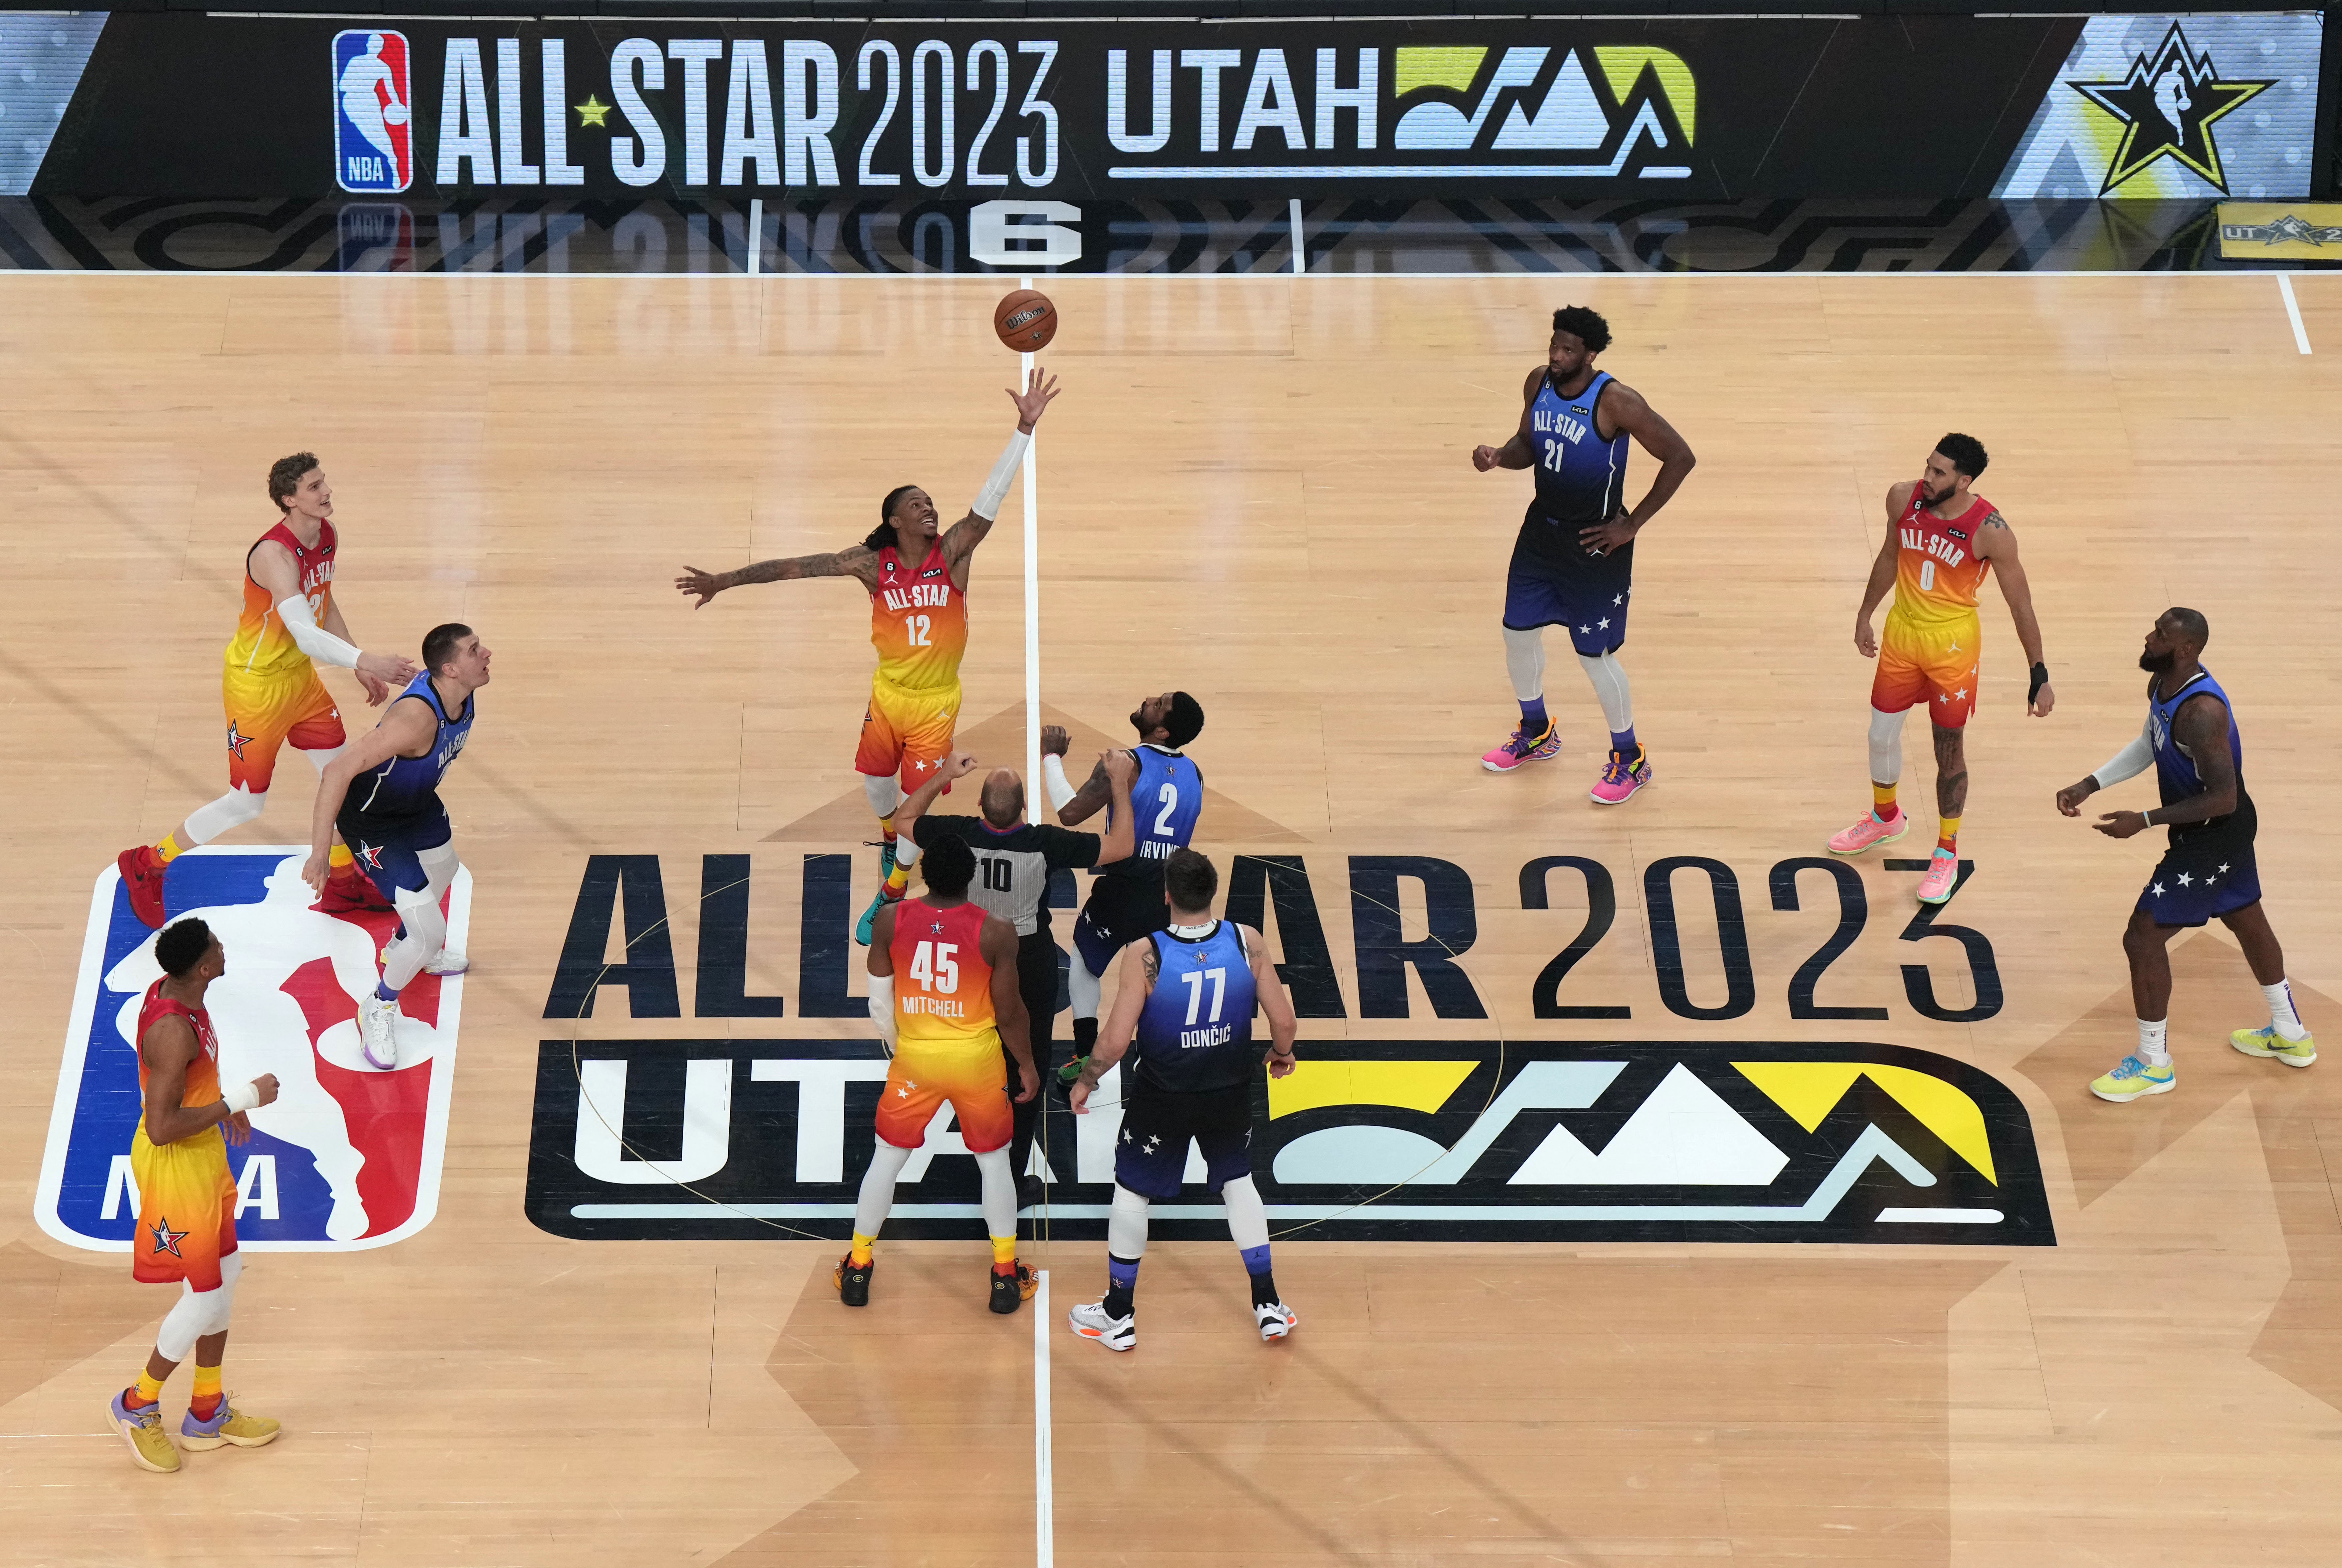 Feb 19, 2023; Salt Lake City, UT, USA; Team Giannis guard Ja Morant (12) takes the opening tip-off to start the 2023 NBA All-Star Game against Team LeBron at Vivint Arena. Mandatory Credit: Kirby Lee-USA TODAY Sports